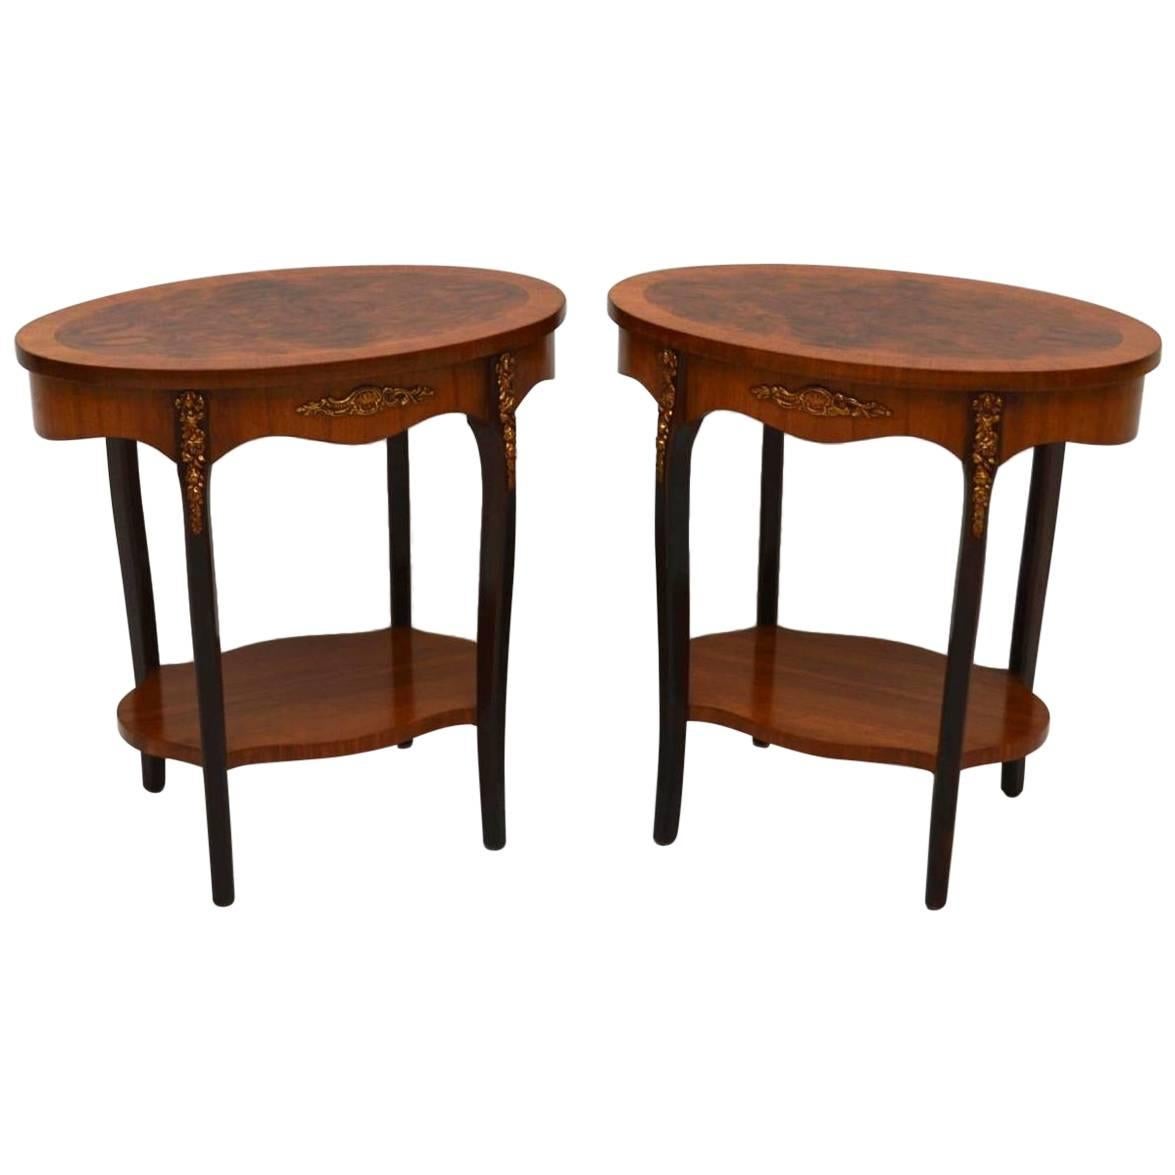 Pair of Antique French Walnut Side or Lamp Tables